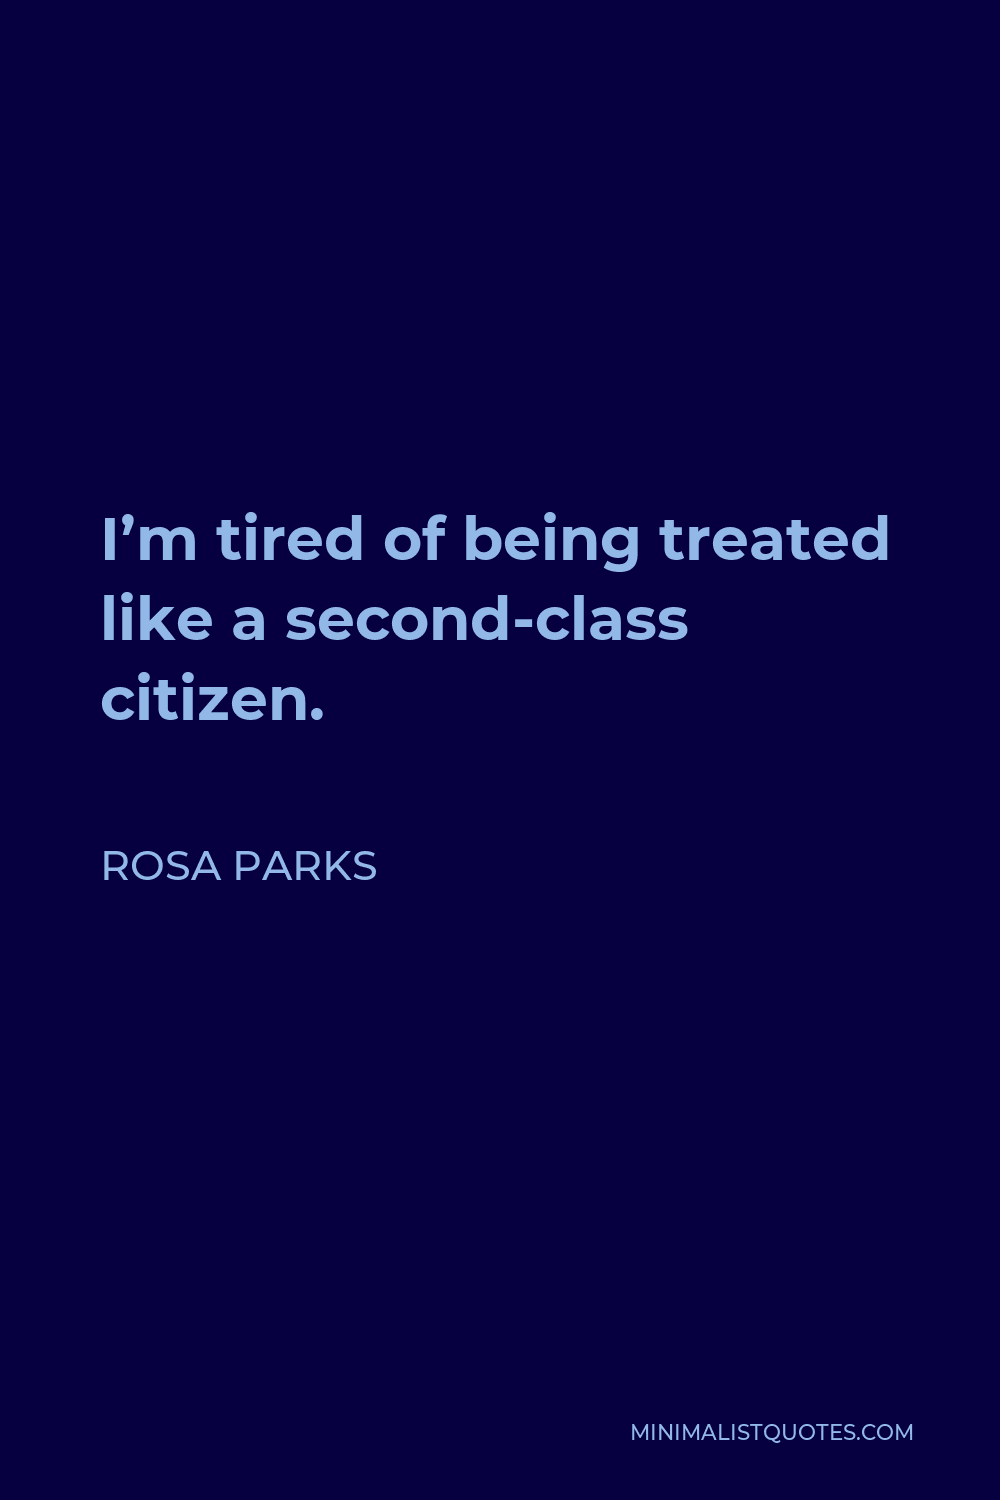 Rosa Parks Quote - I’m tired of being treated like a second-class citizen.